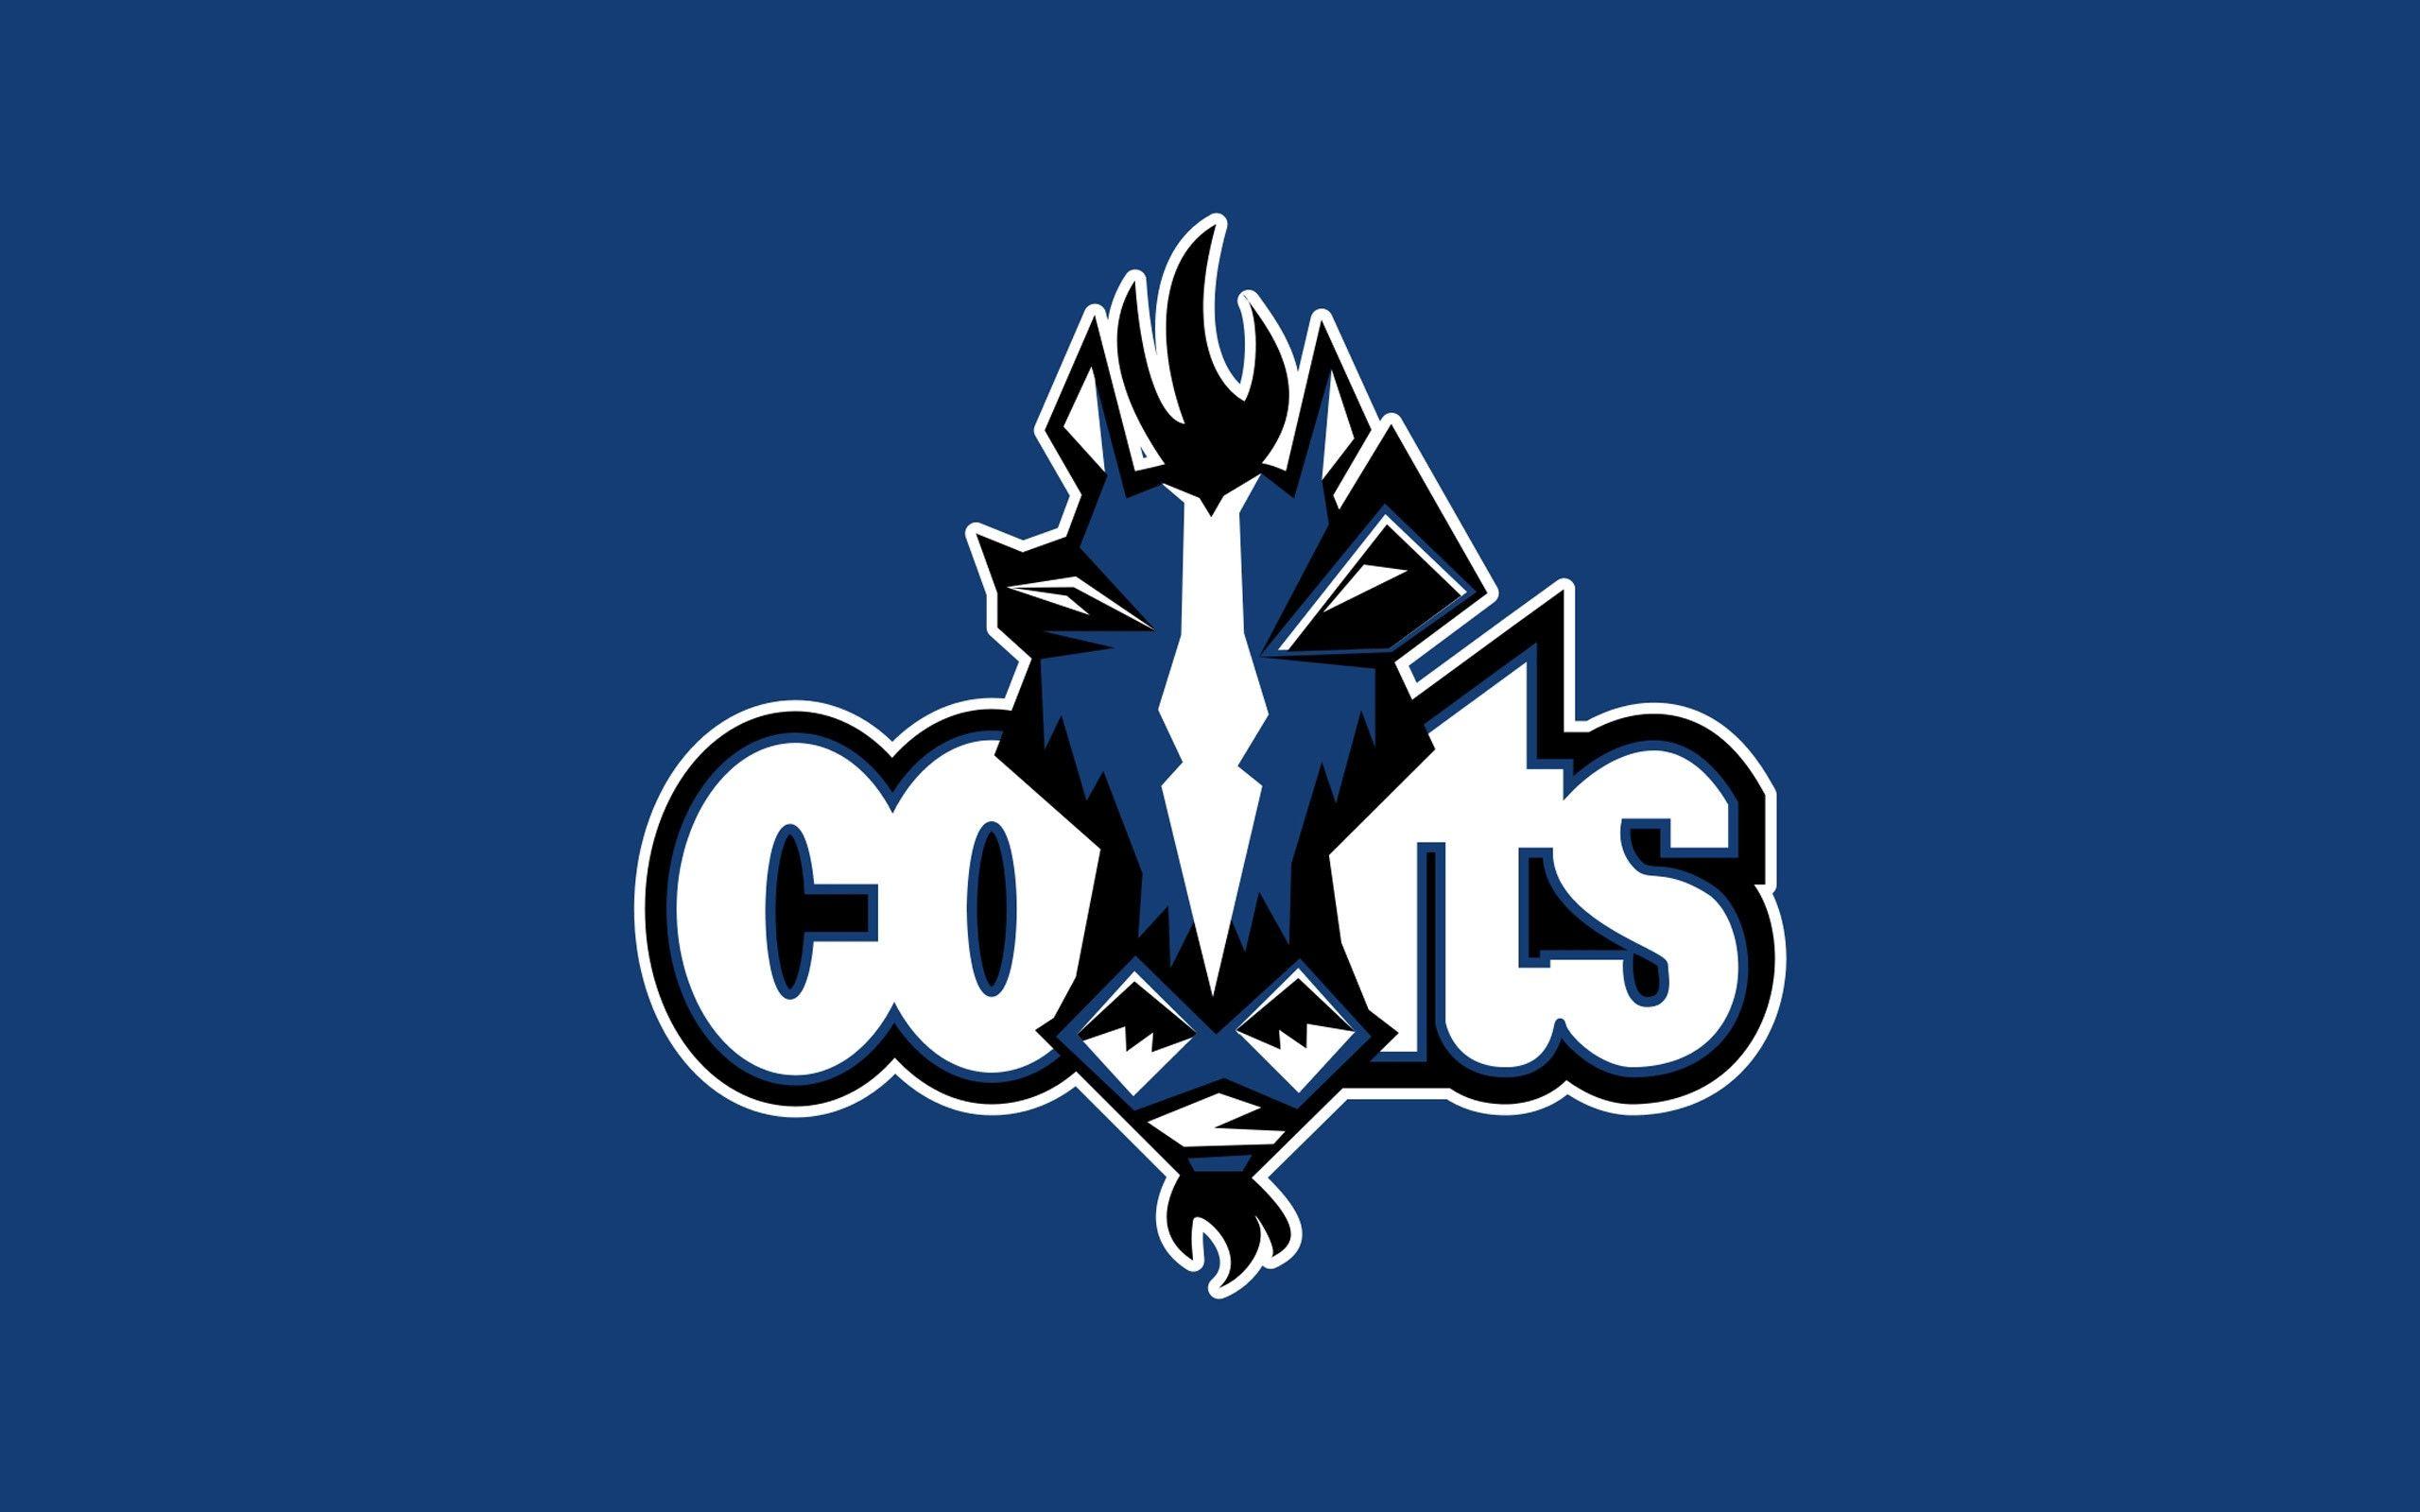 Indianapolis Colts 2014 NFL Logo Wallpaper Wide or HD. Sports